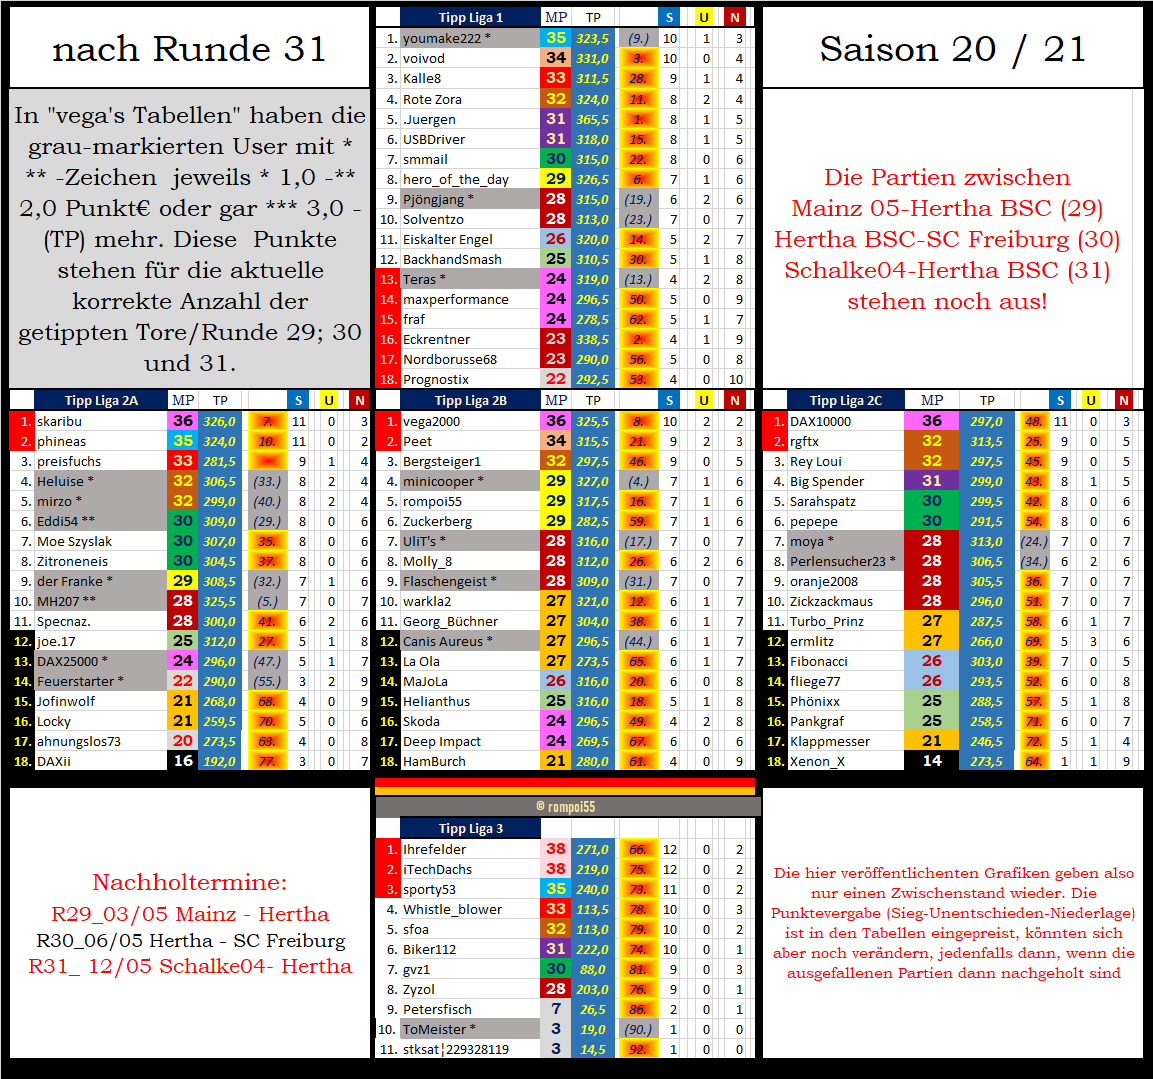 tabelle_zw_nach_runde_31.png